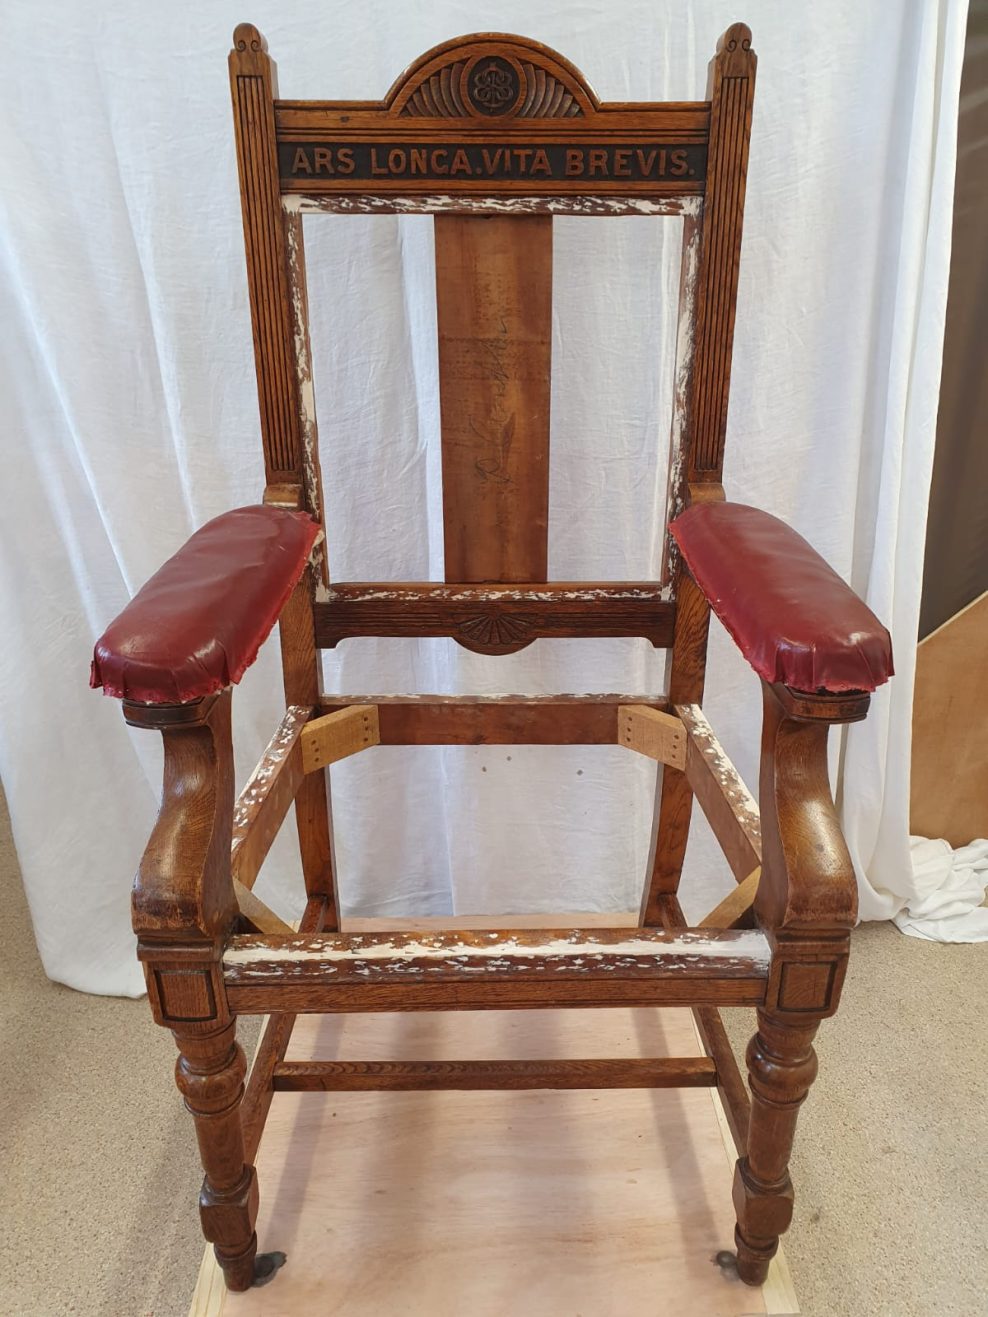 Chair conservation and re-upholstery